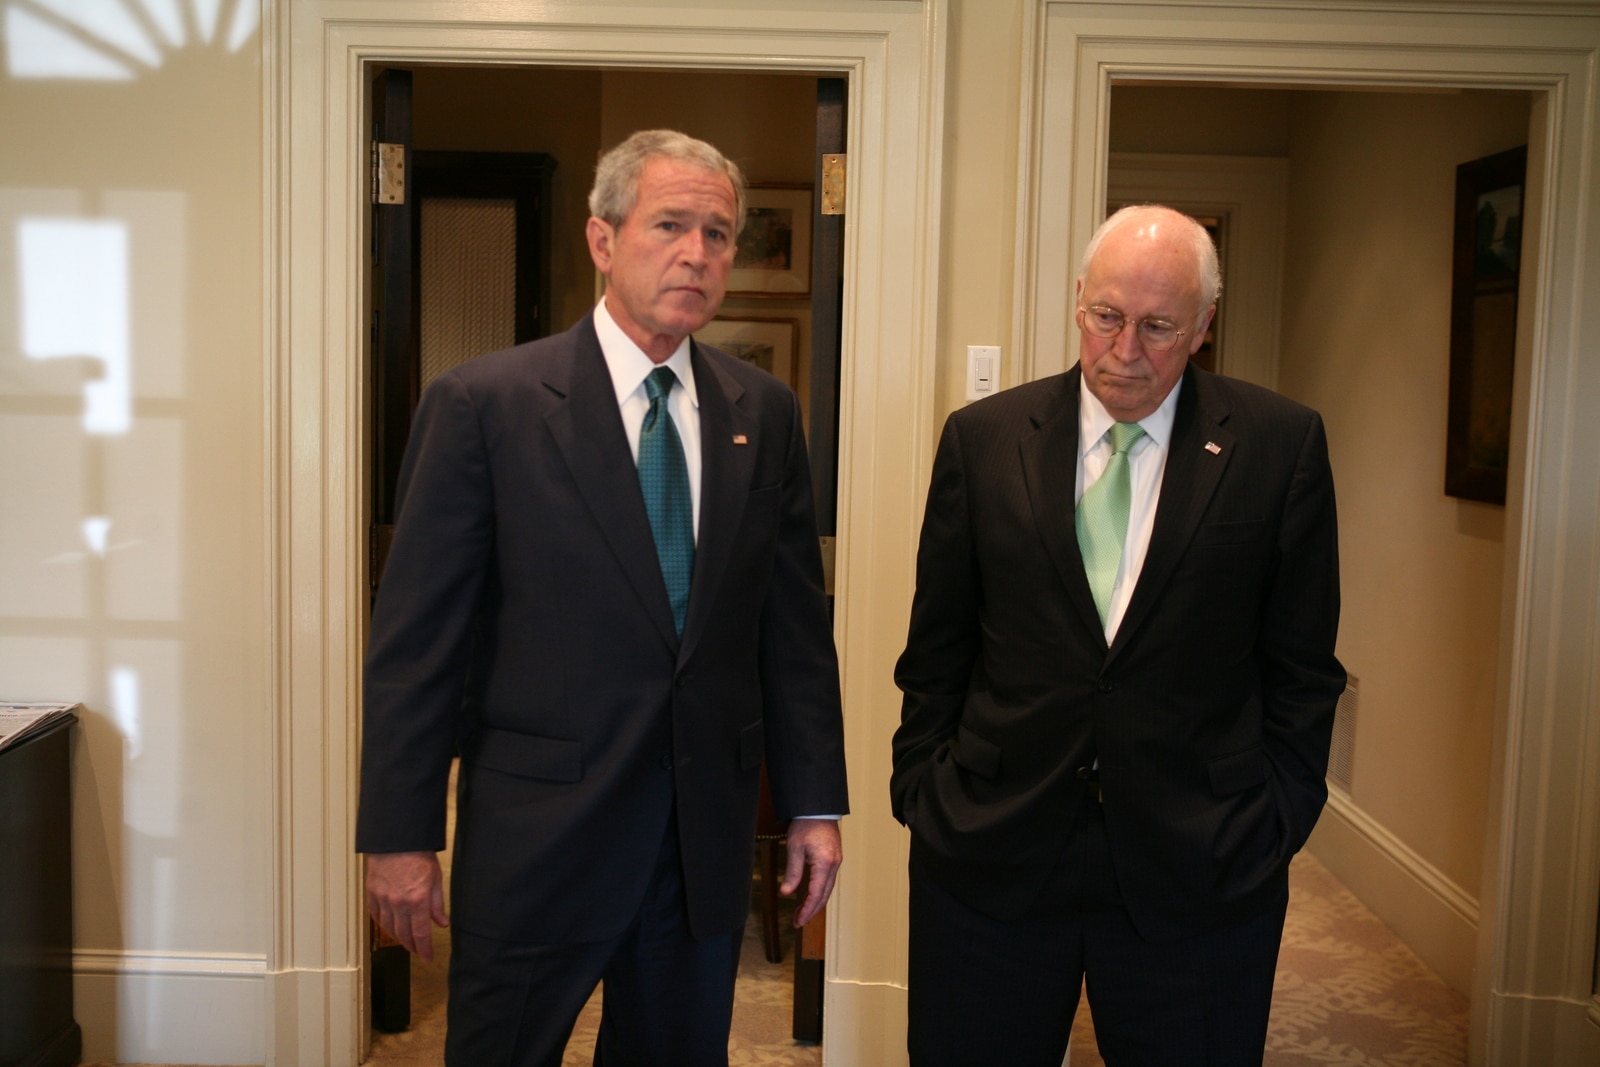 vp cheney: in outer oval with president bush before statement with cabinet.